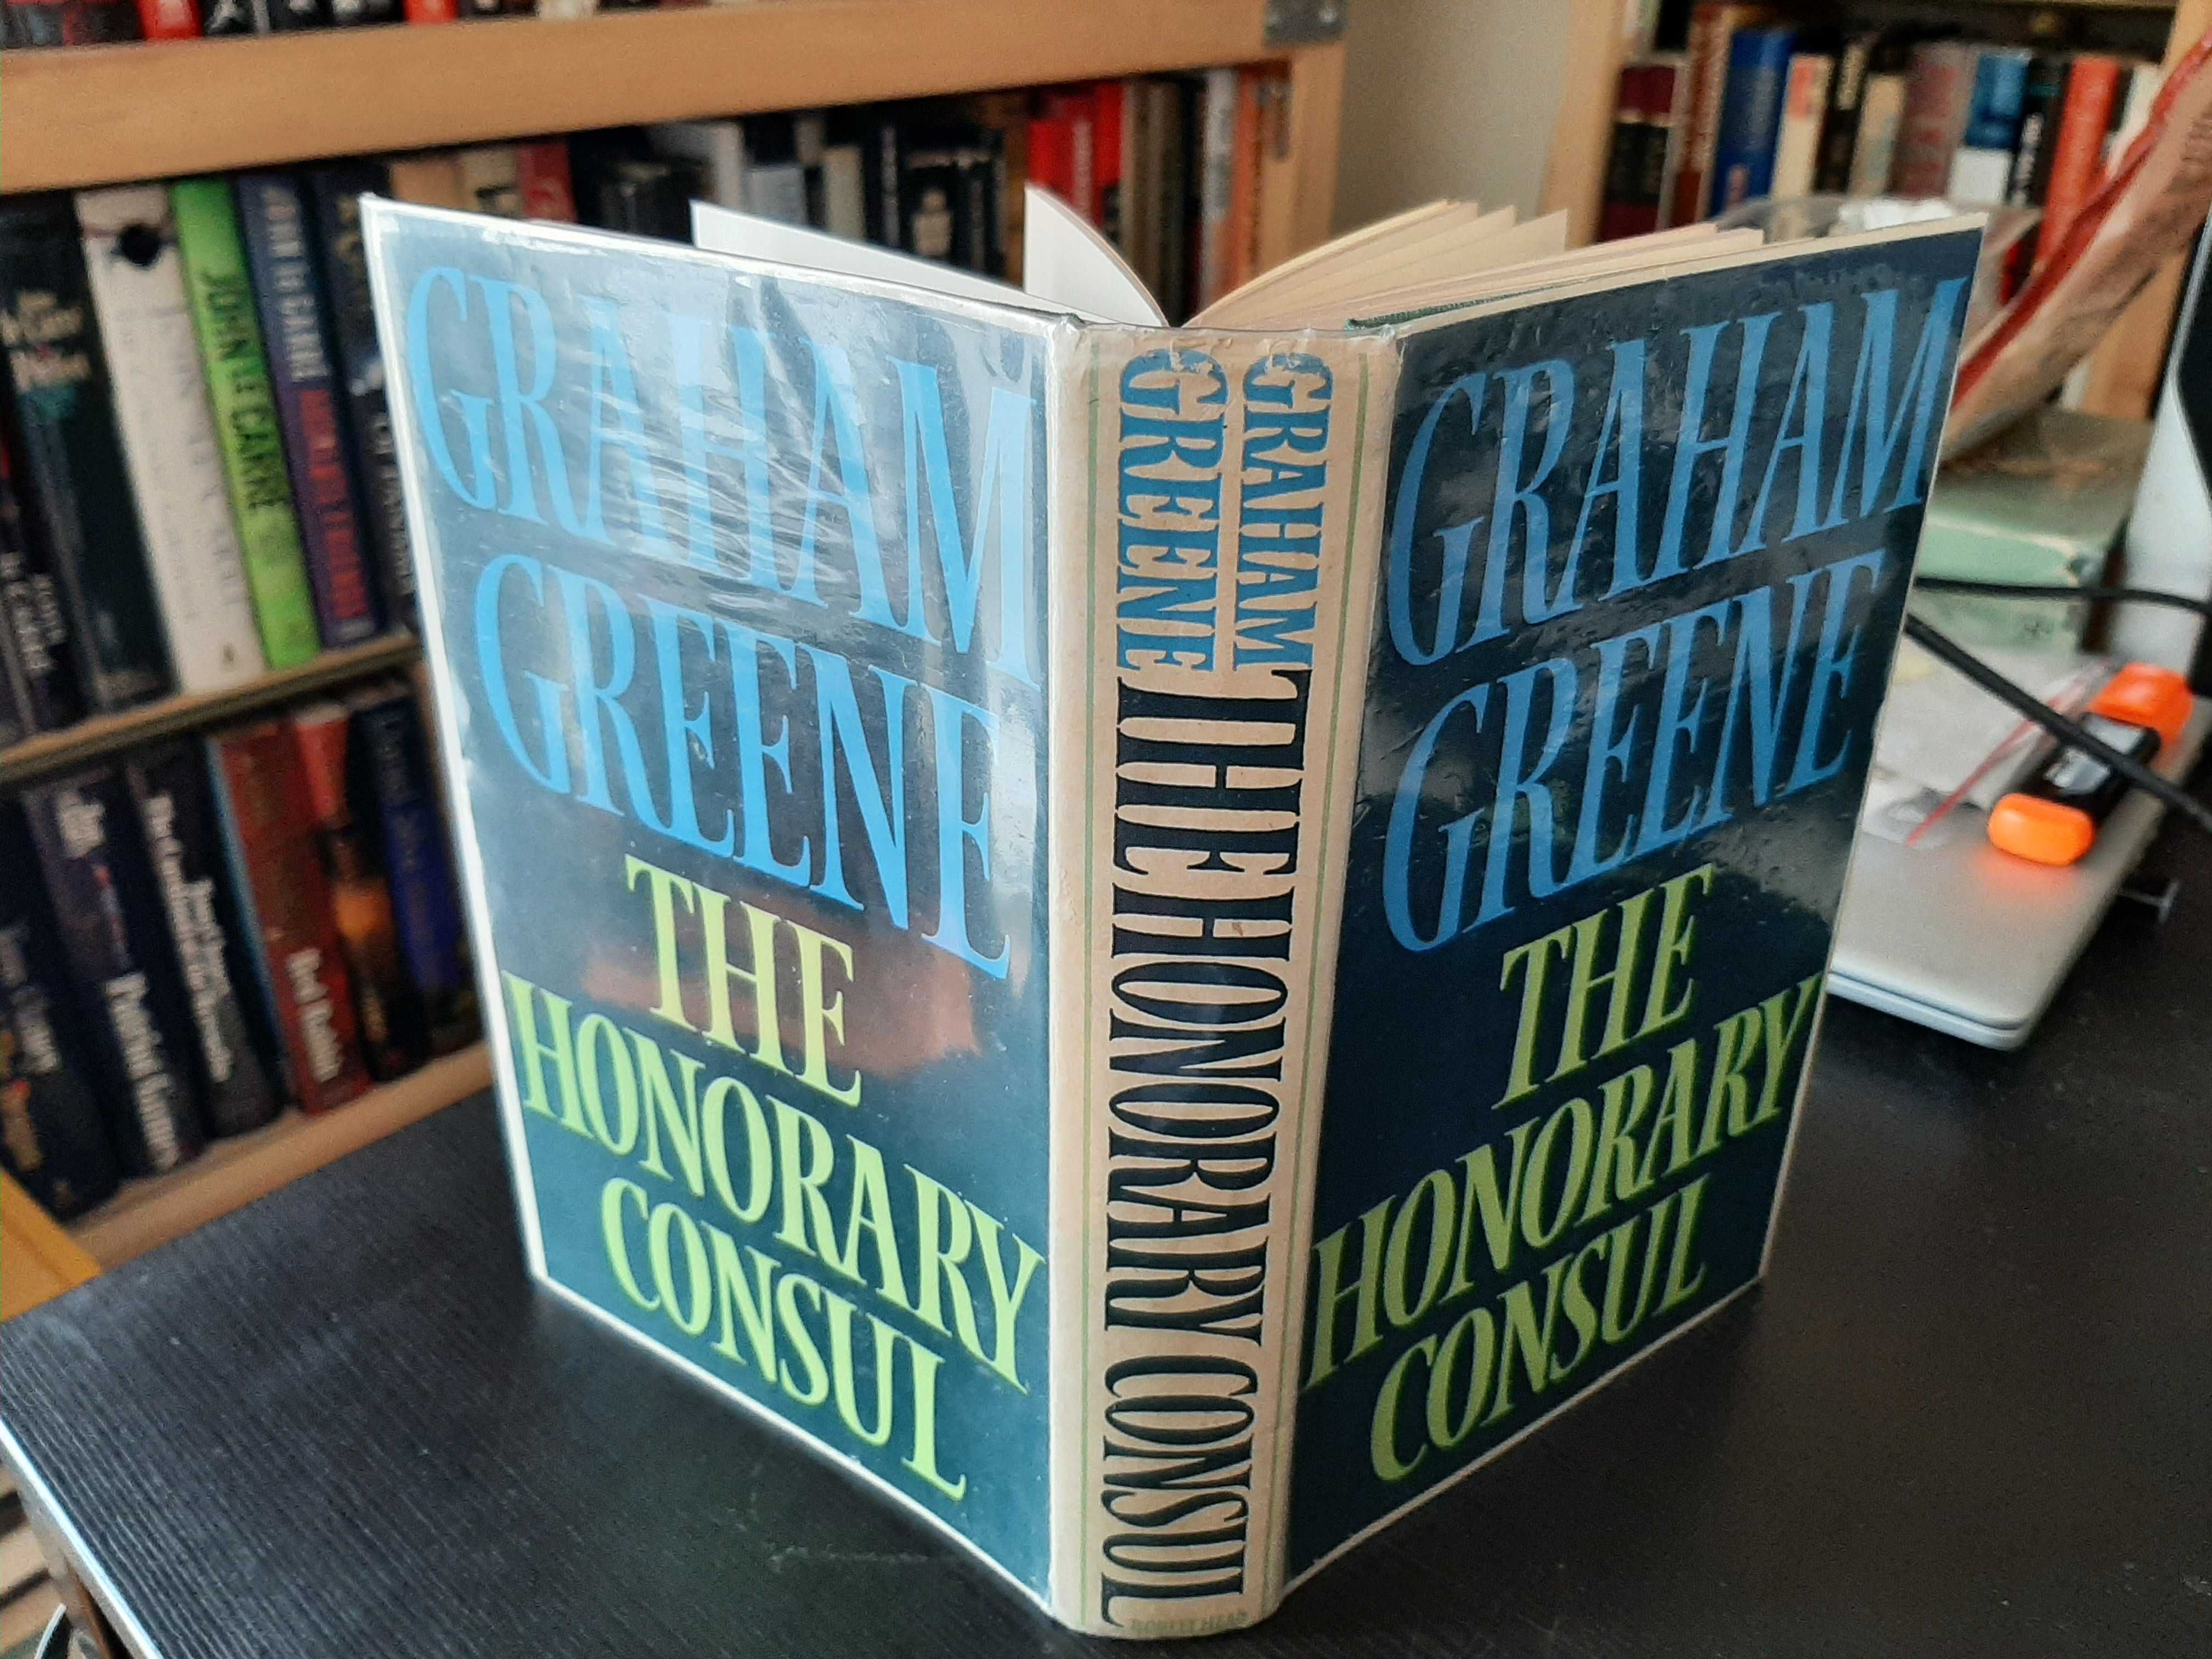 Graham Greene - The Honorary Consul  / John Le Carré - Smiley's People